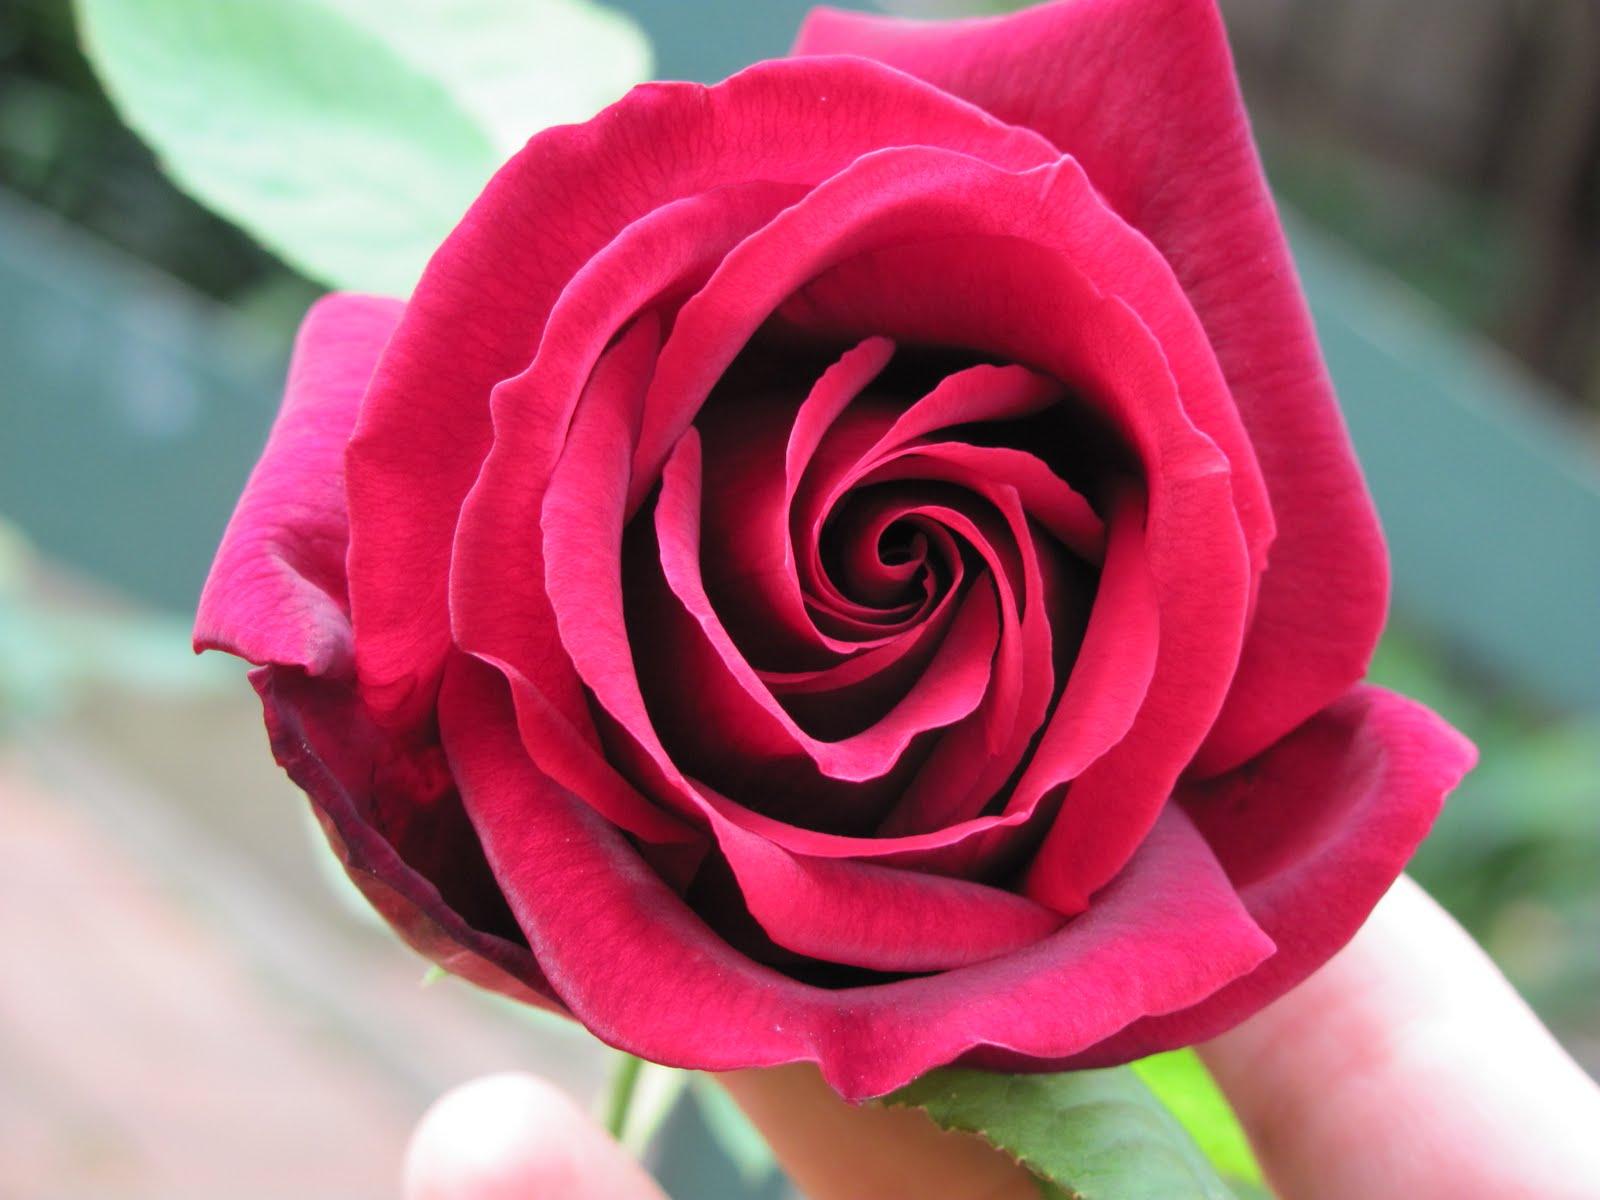 I want to EAT this rose ,